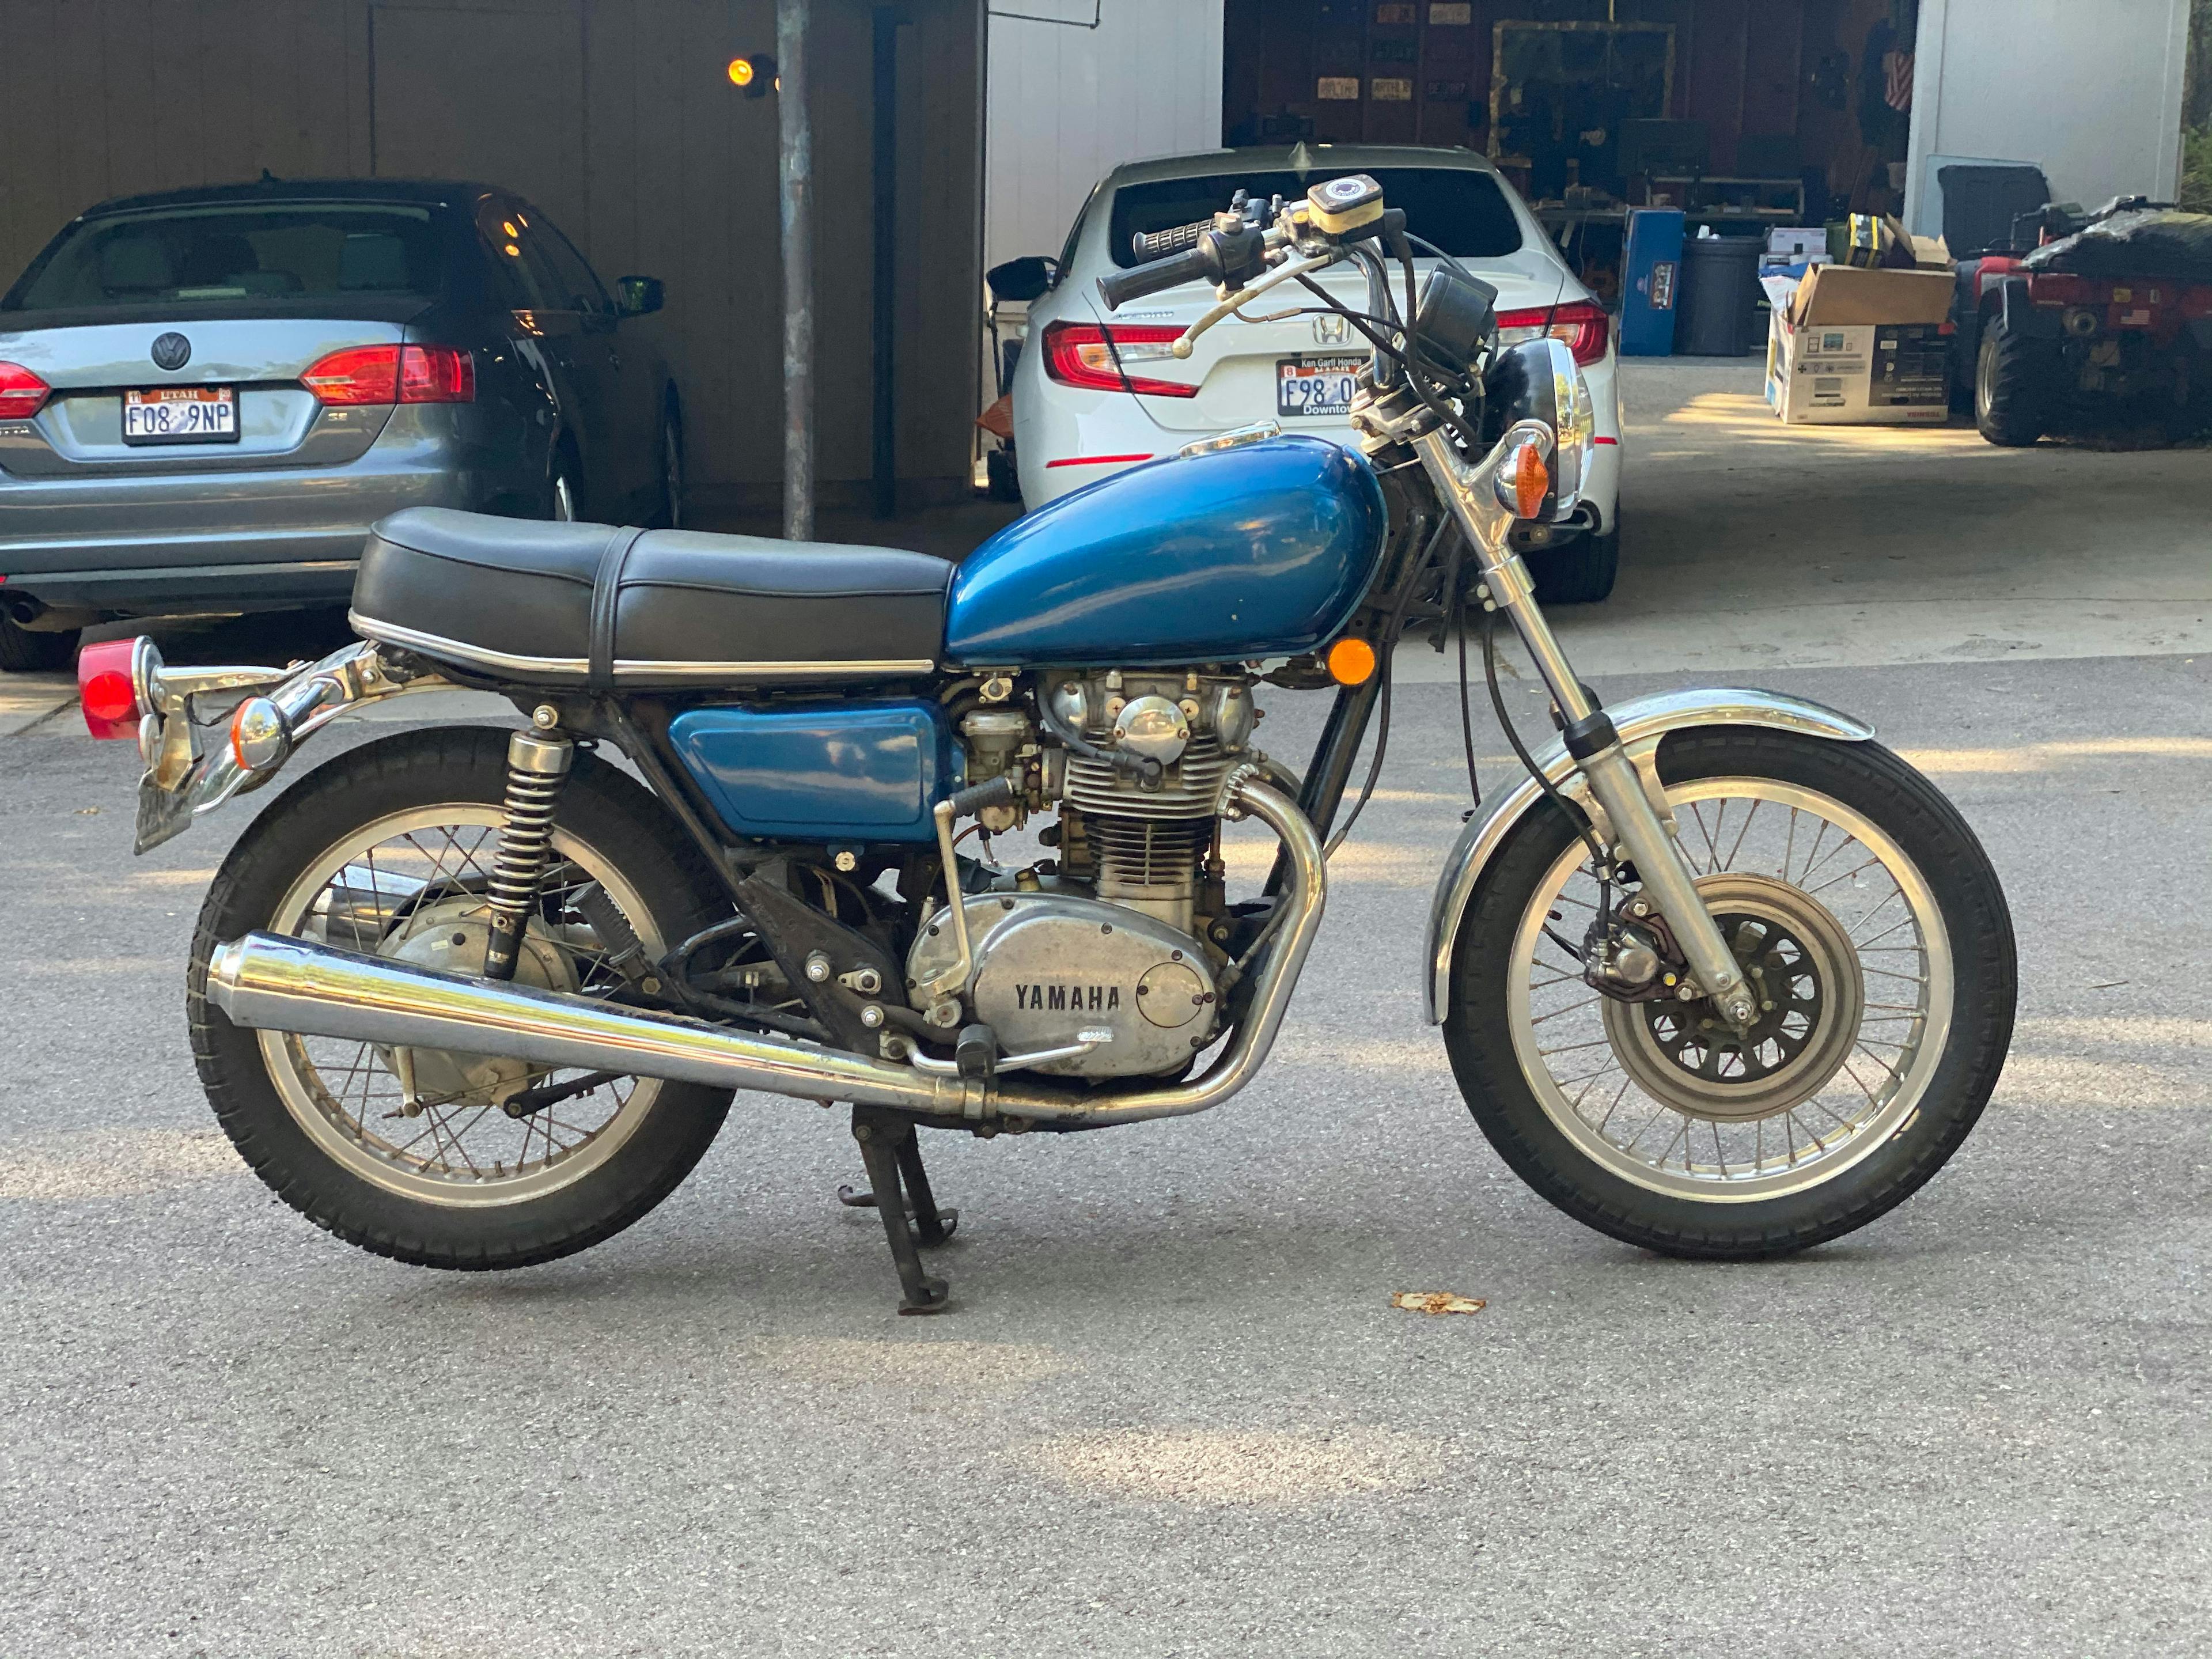 1977 XS650 is a solid machine, very reliable. 